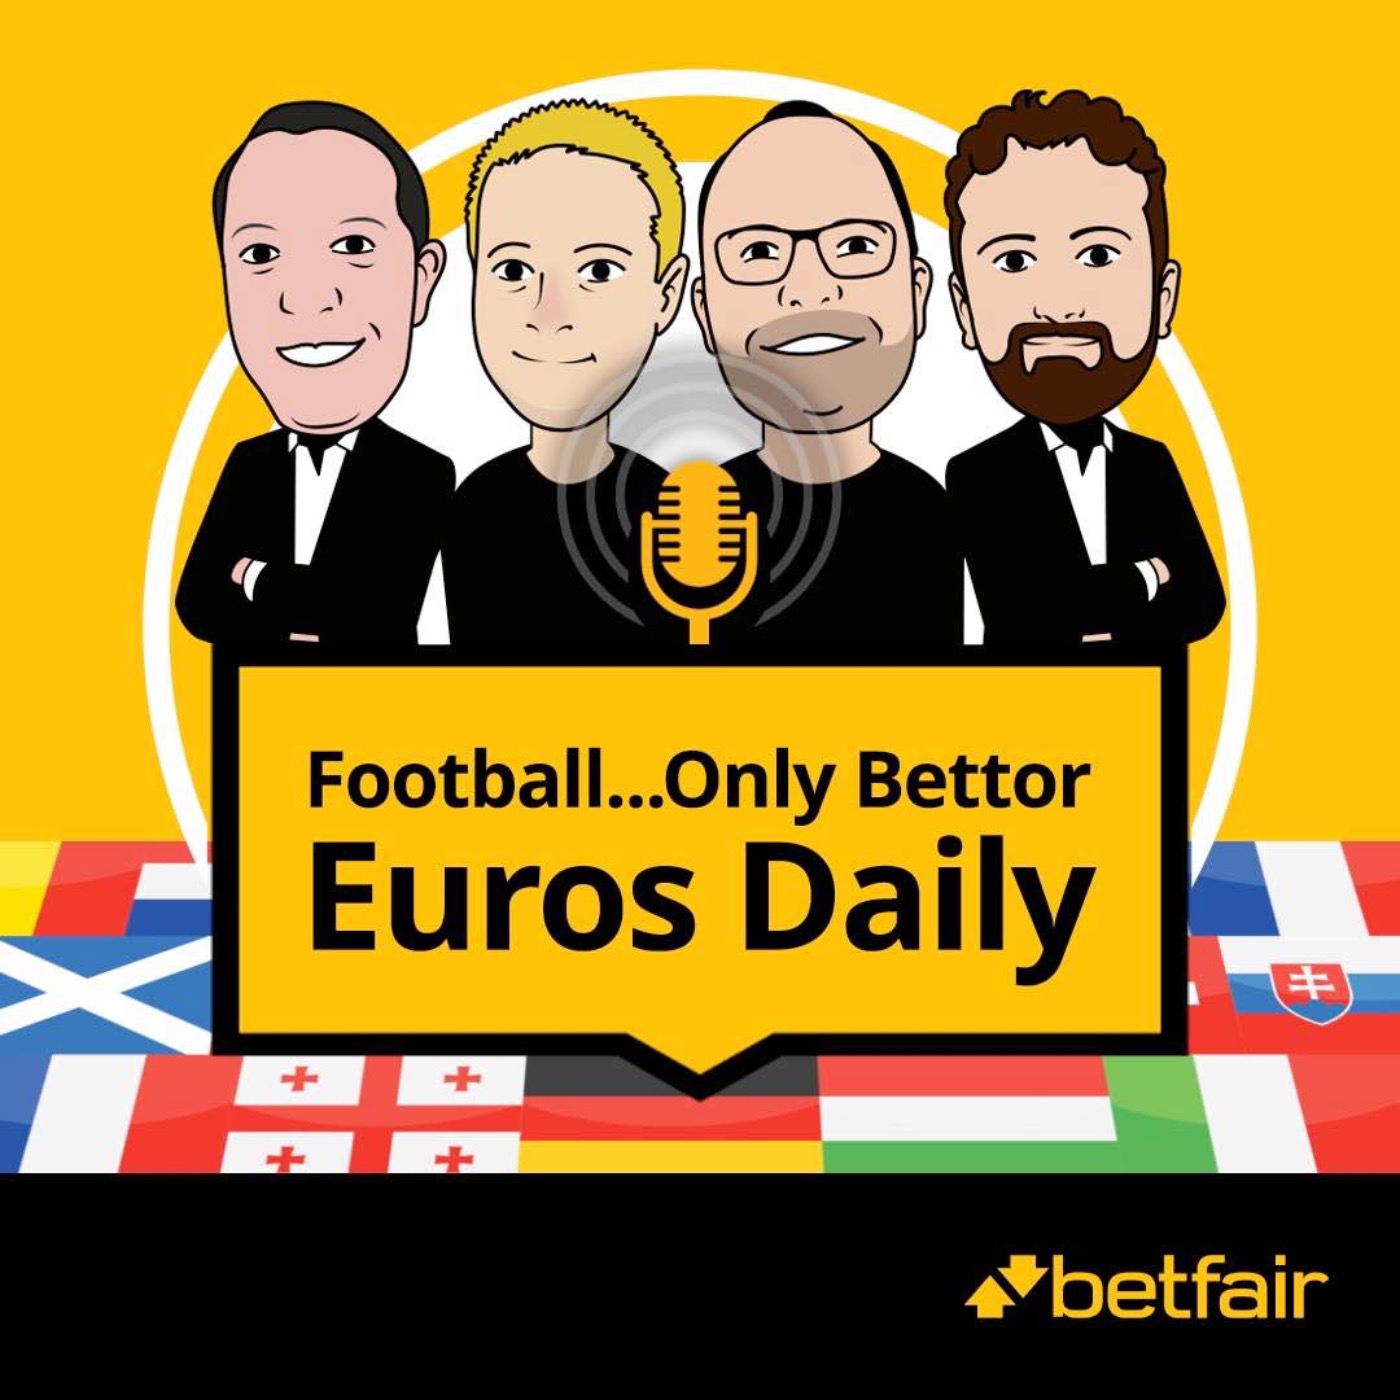 Mbappe bloodied, The Ronaldo Double & Tuesday Tips | Football…Only Bettor: Euros Daily